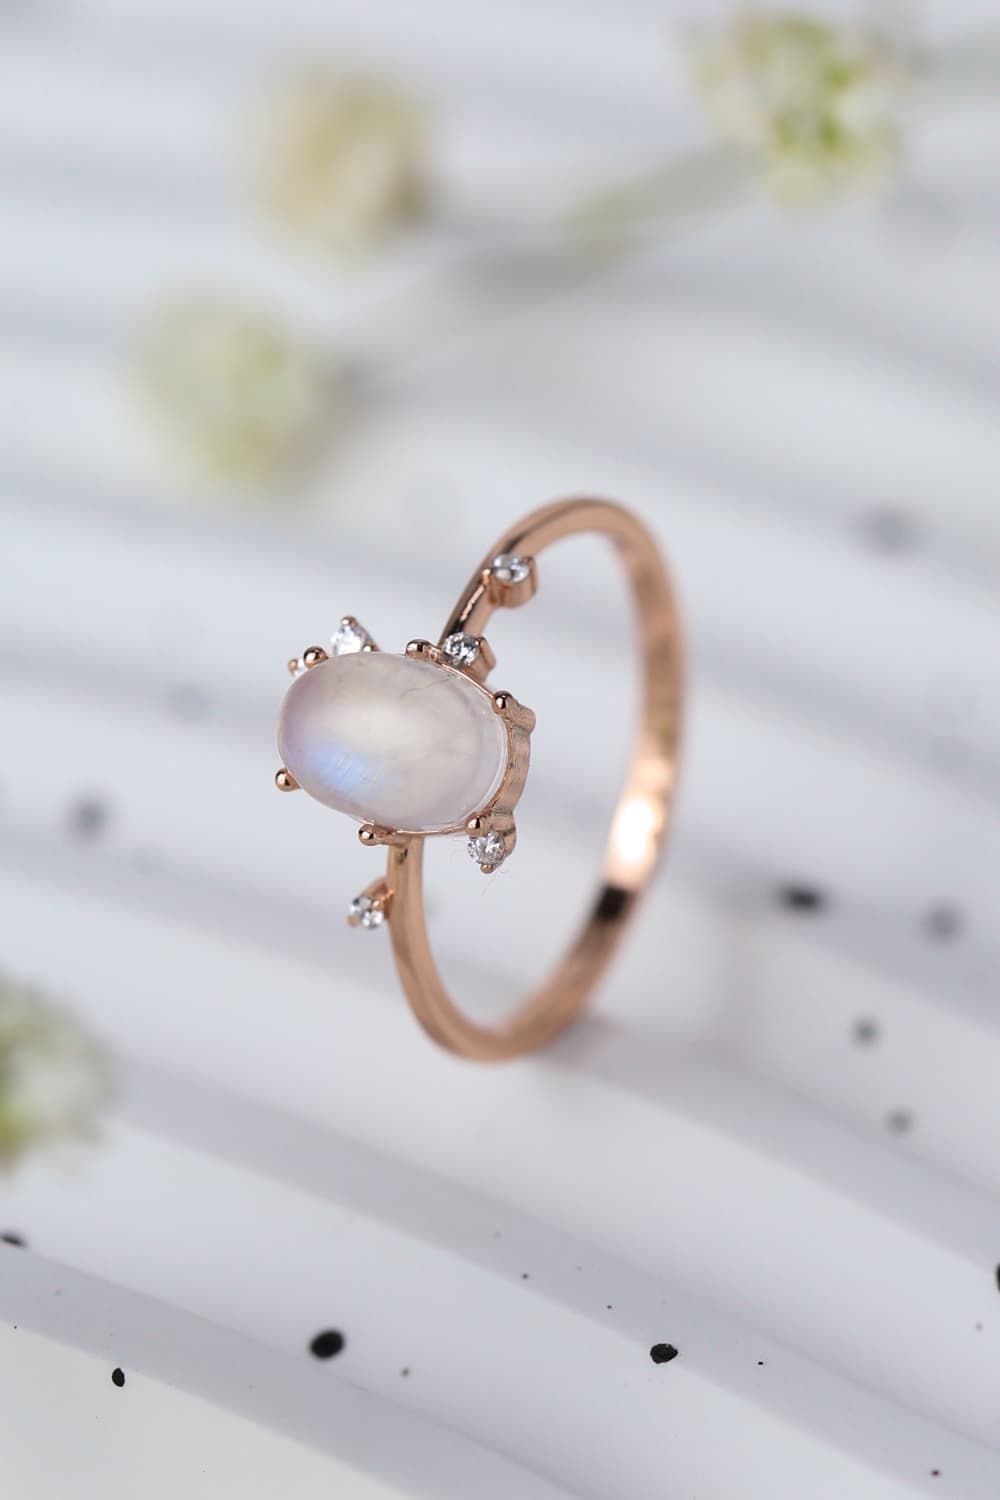 Gray High Quality Natural Moonstone 925 Sterling Silver Ring